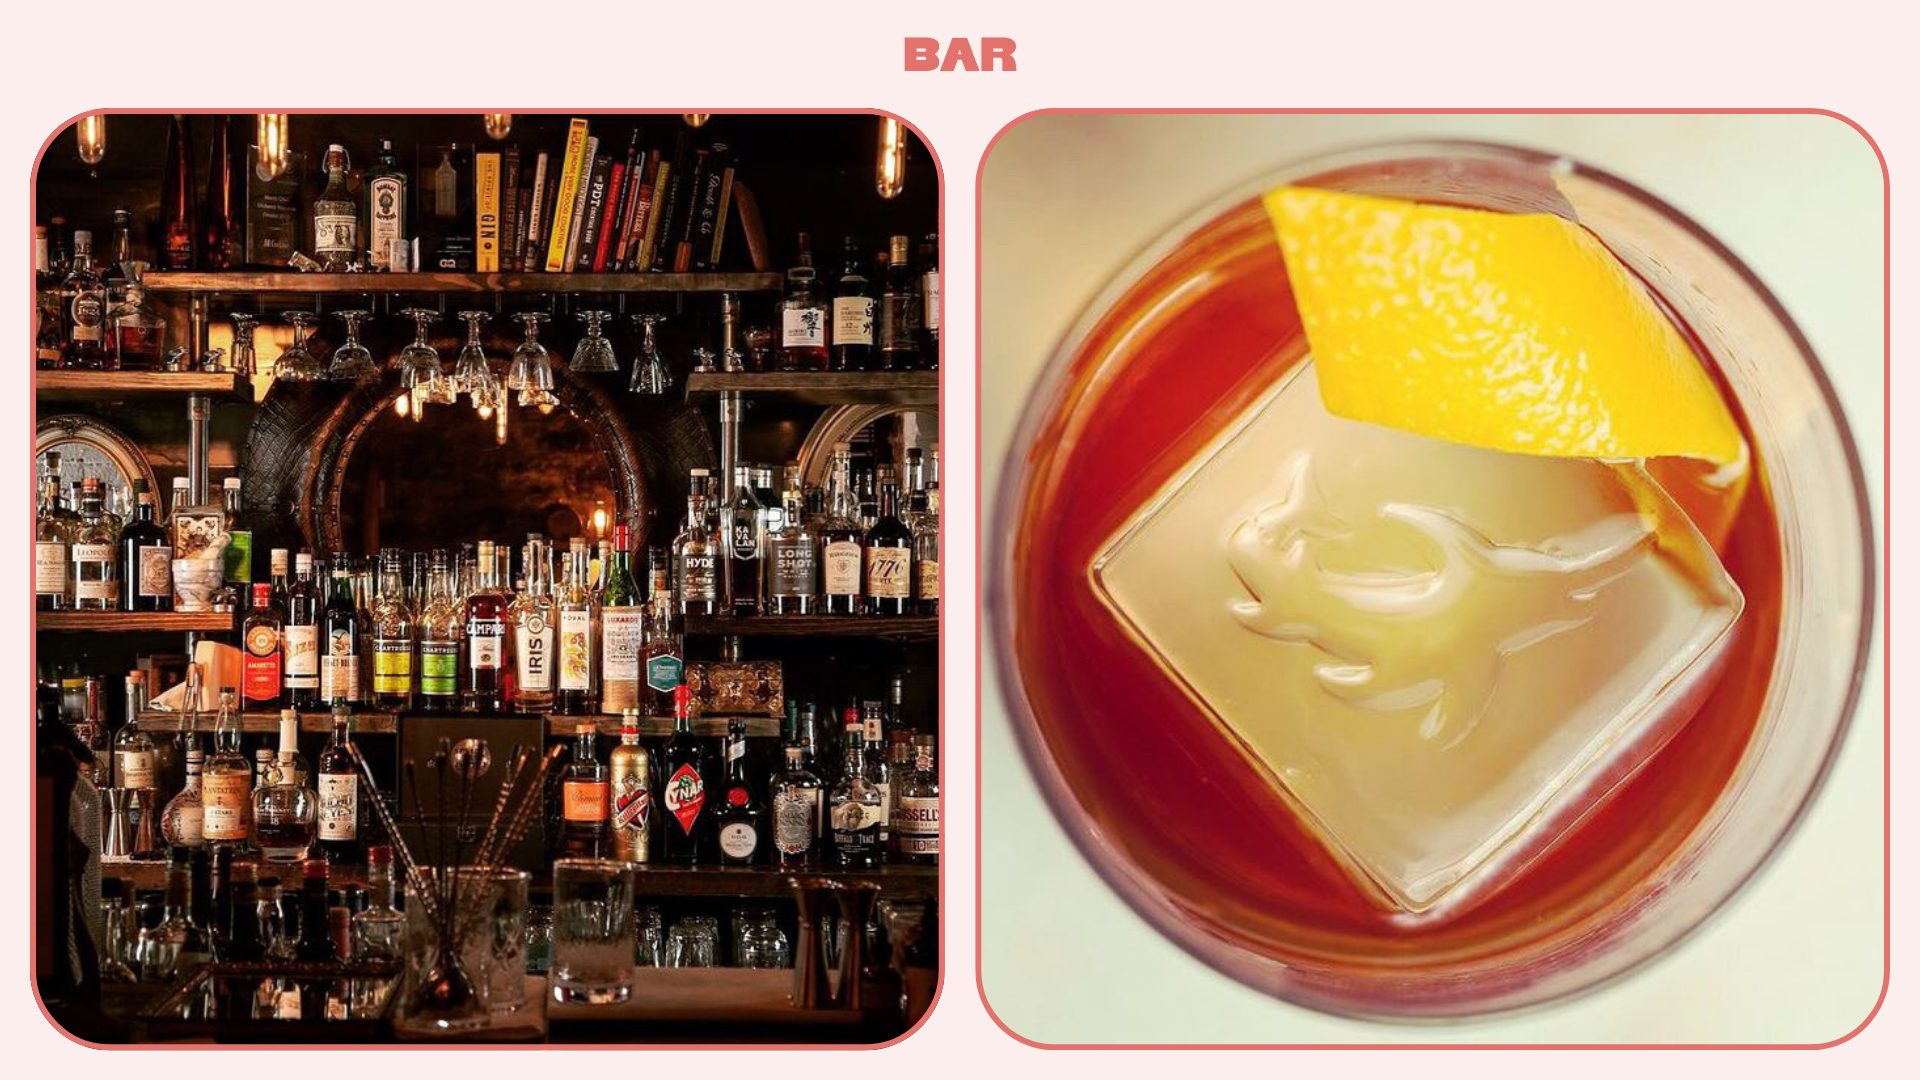 Fully-stocked bar in Kansas City and a close-up shot of a negroni cocktail